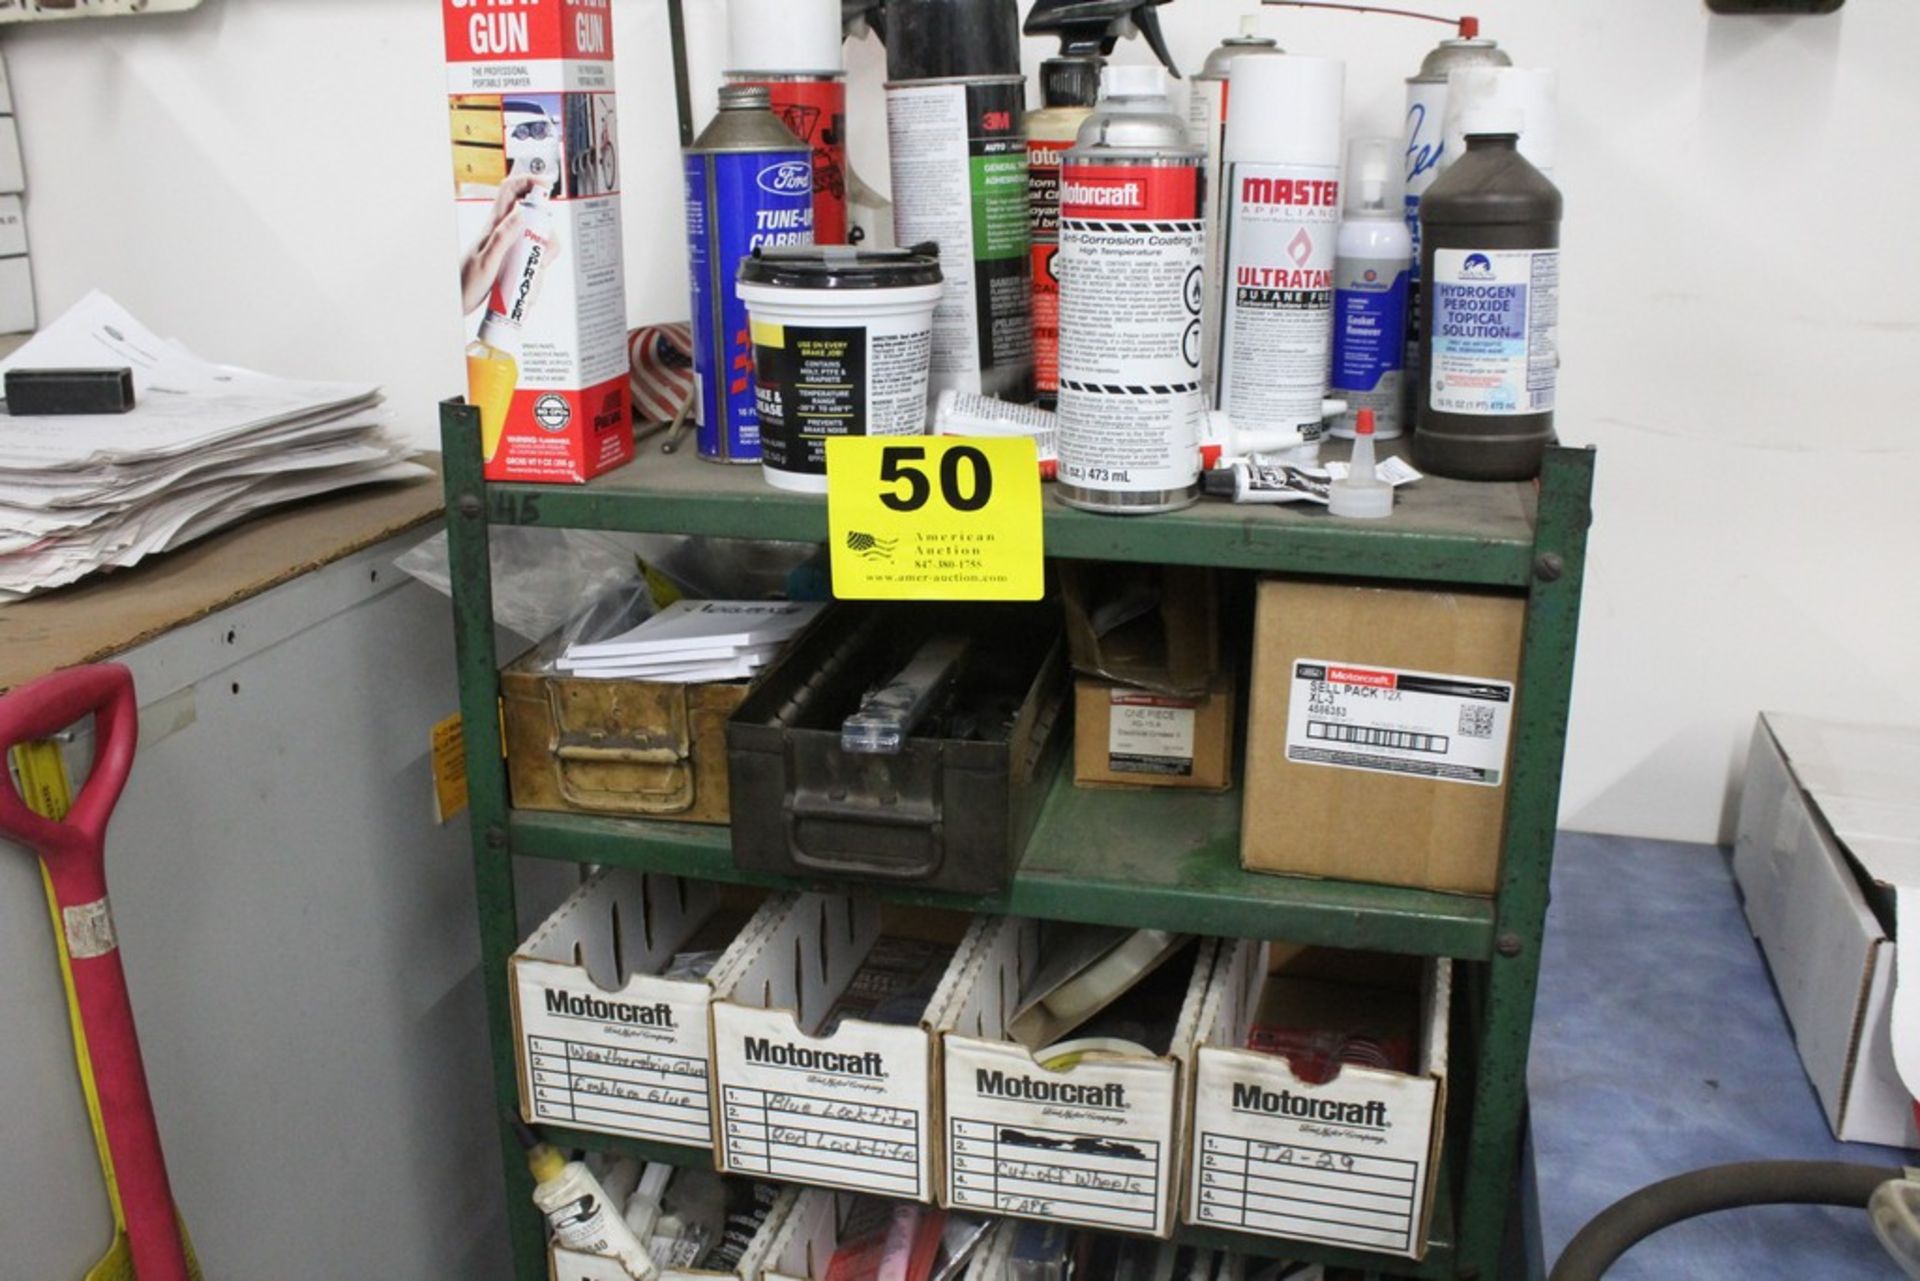 ASSORTED TUBES OF LOCK-TITE, THREAD SEALER, GLUES, SPRAYS, ETC, SHELVING UNIT INCLUDED - Image 2 of 3